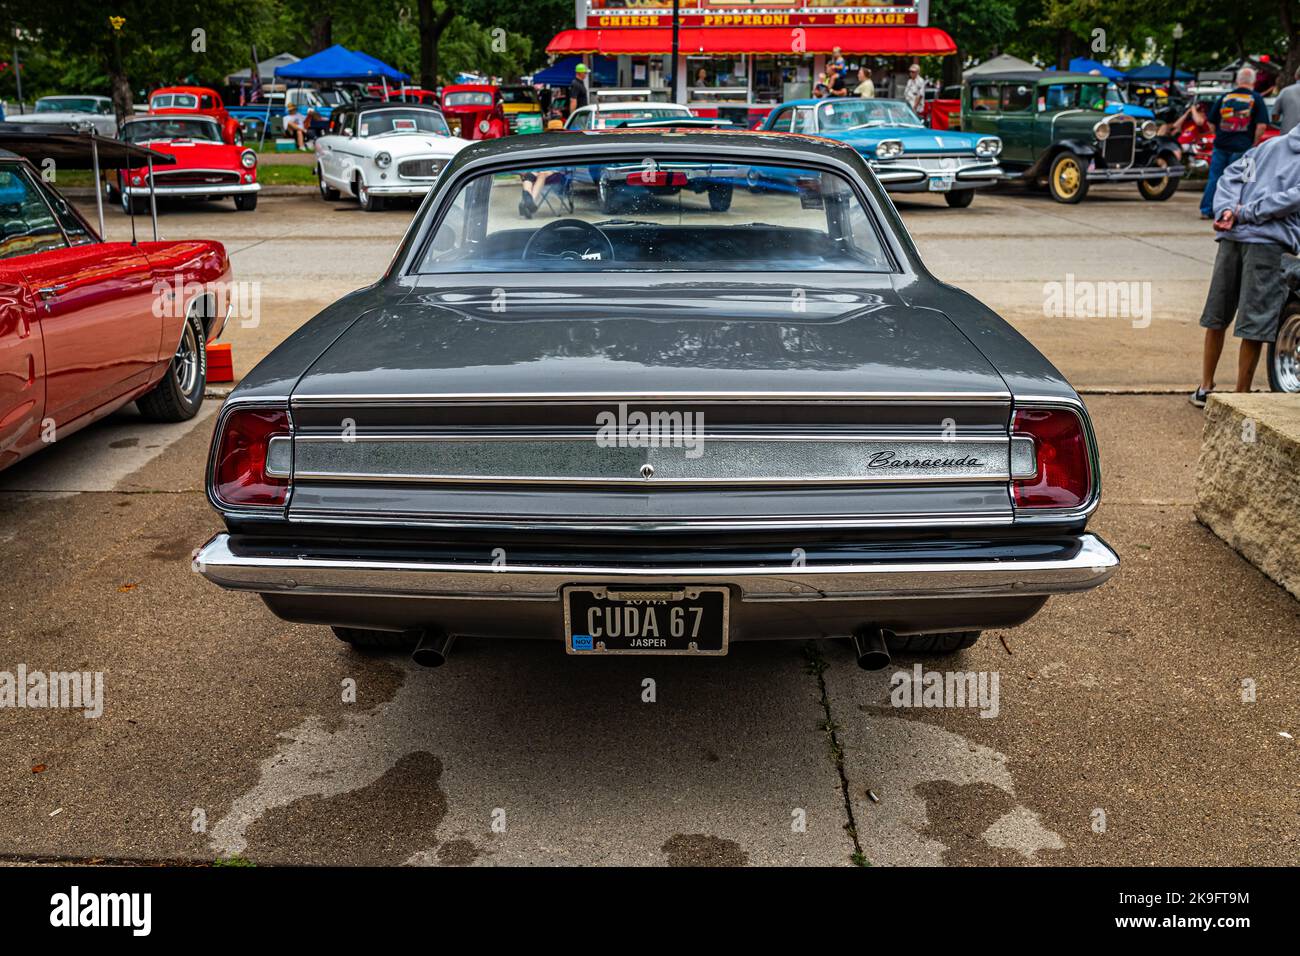 Des Moines, IA - July 01, 2022: High perspective rear view of a 1967 Plymouth Barracuda 2 Door Hardtop at a local car show. Stock Photo